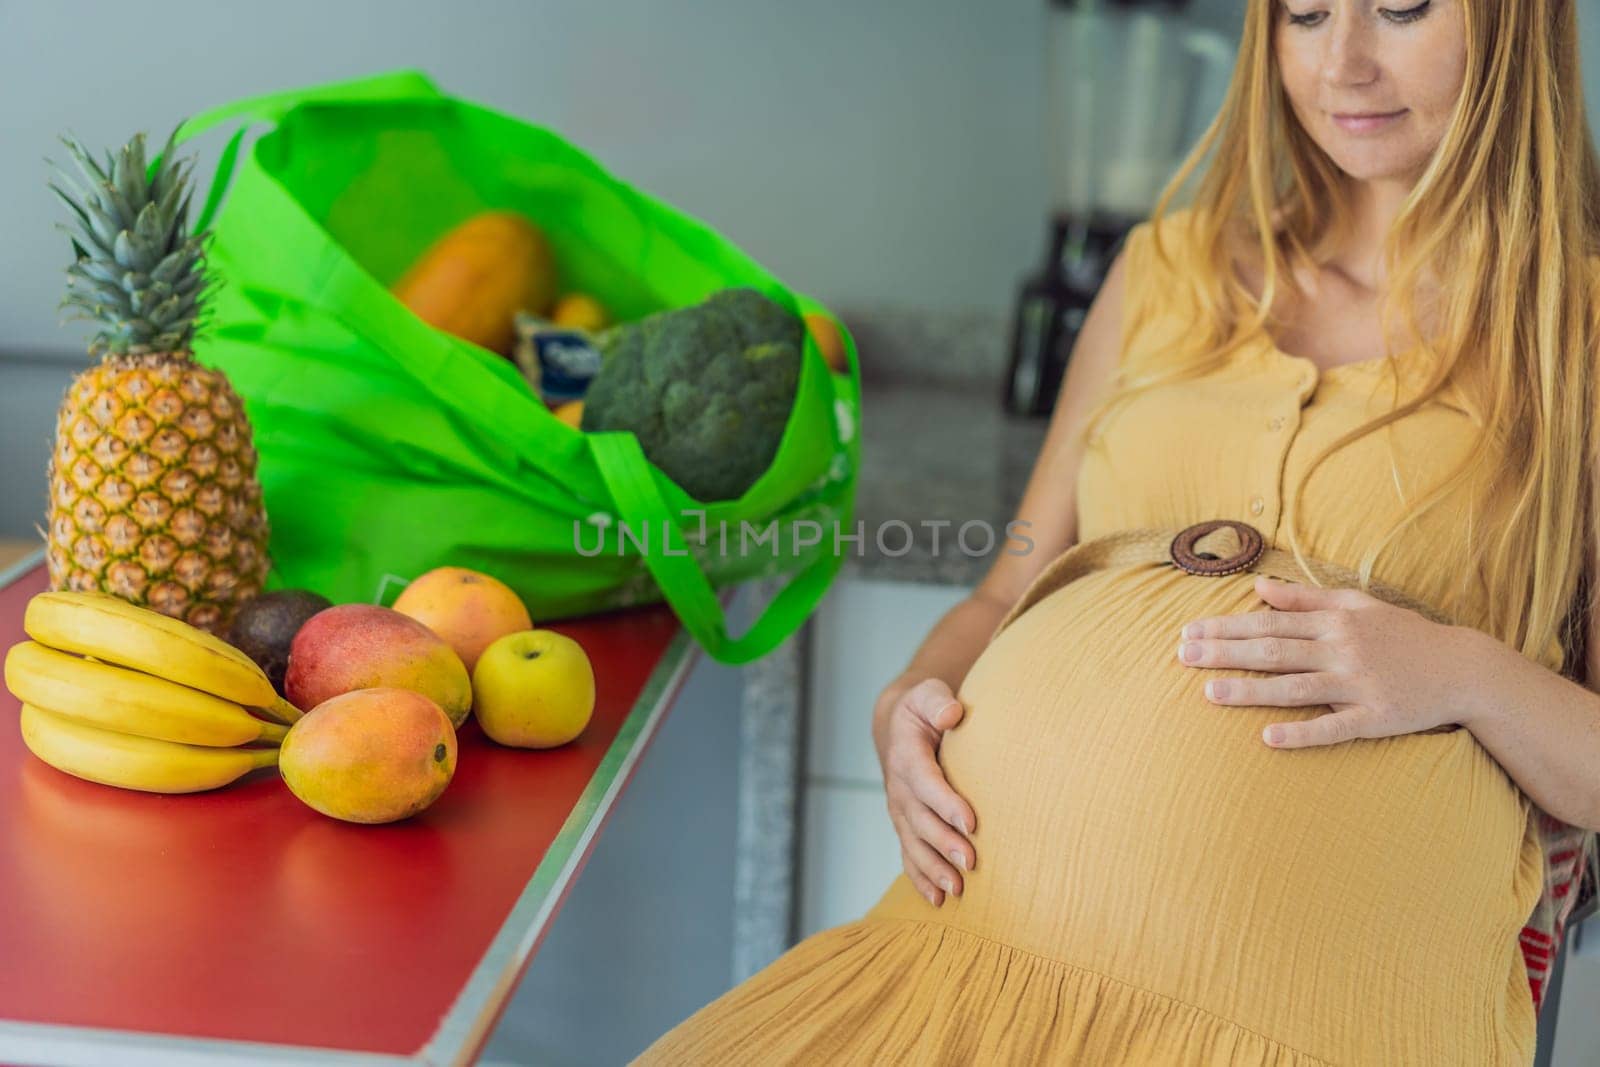 Exhausted but resilient, a pregnant woman feels fatigue after bringing home a sizable bag of groceries, showcasing her dedication to providing nourishing meals for herself and her baby by galitskaya